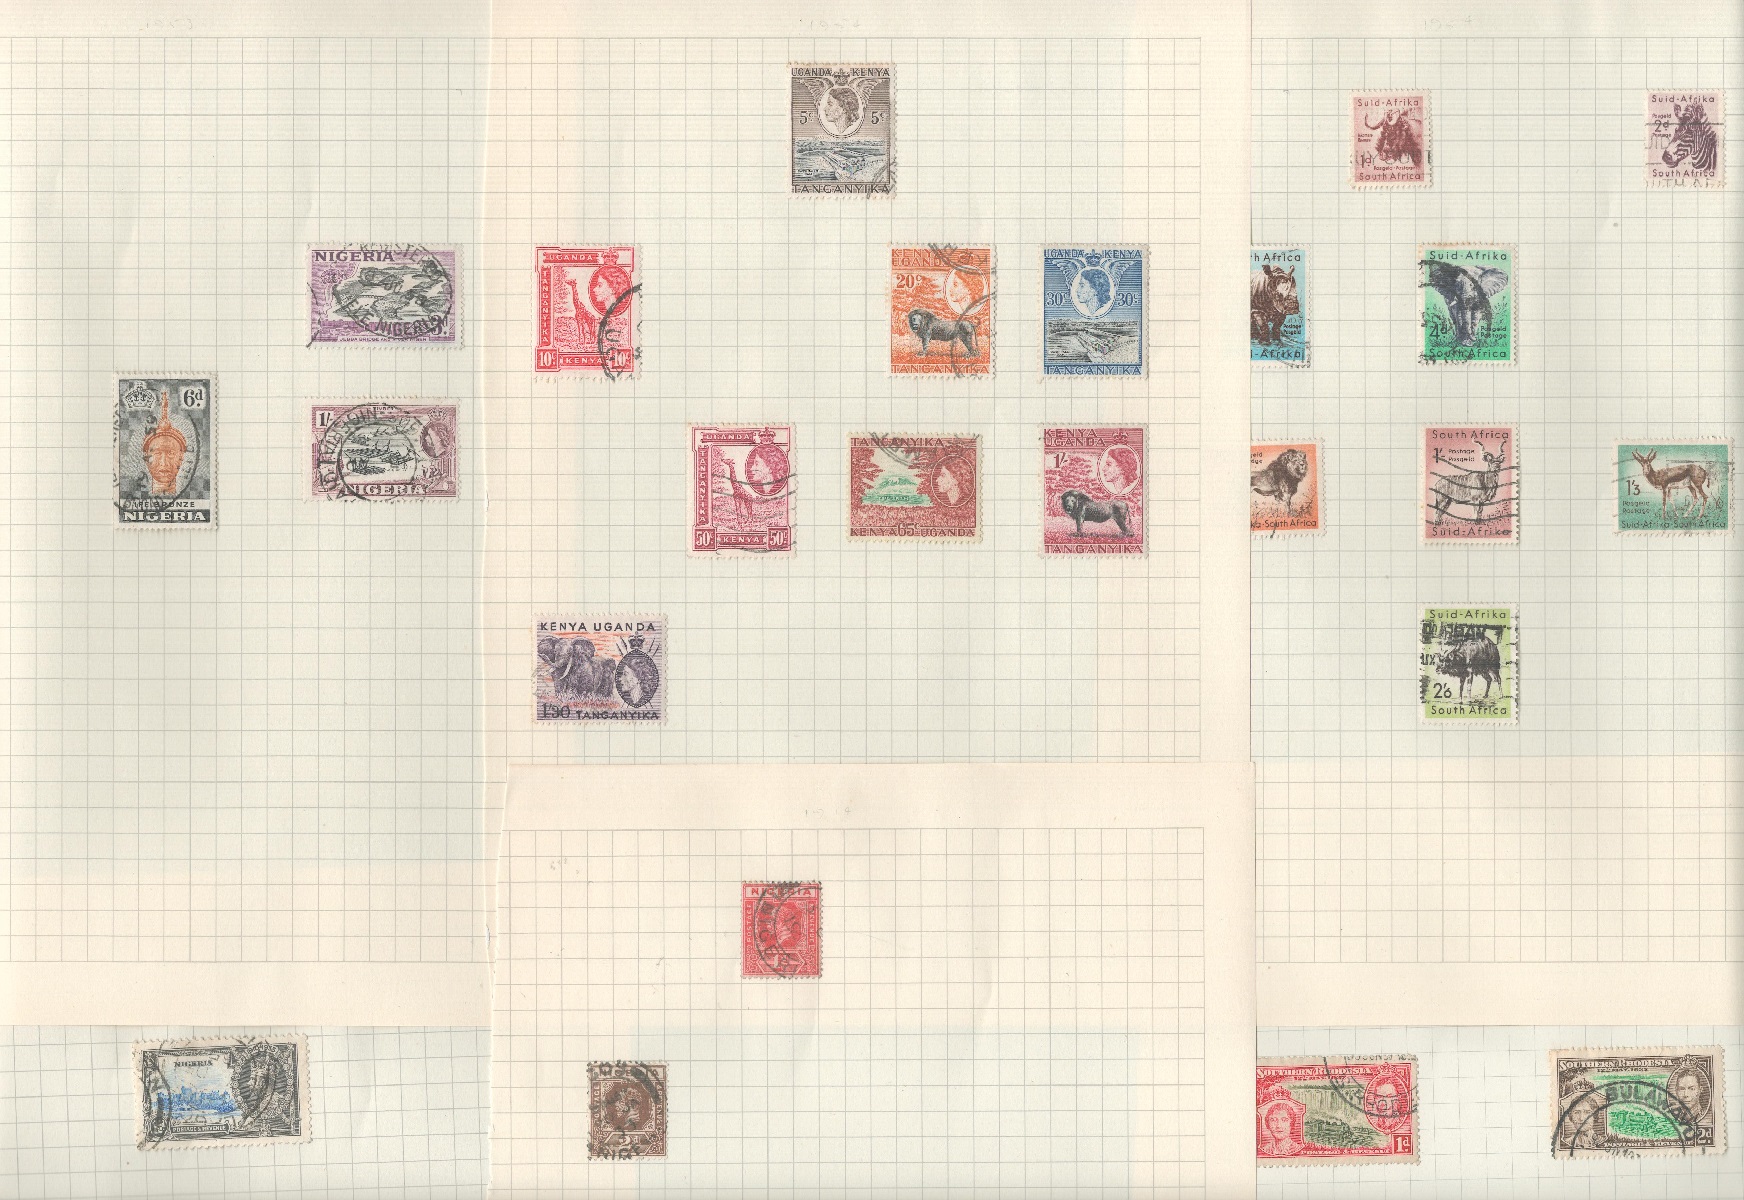 BCW stamp collection on 23 loose pages. Includes NZ, Rhodesia and Nyasaland, Singapore, Malta,